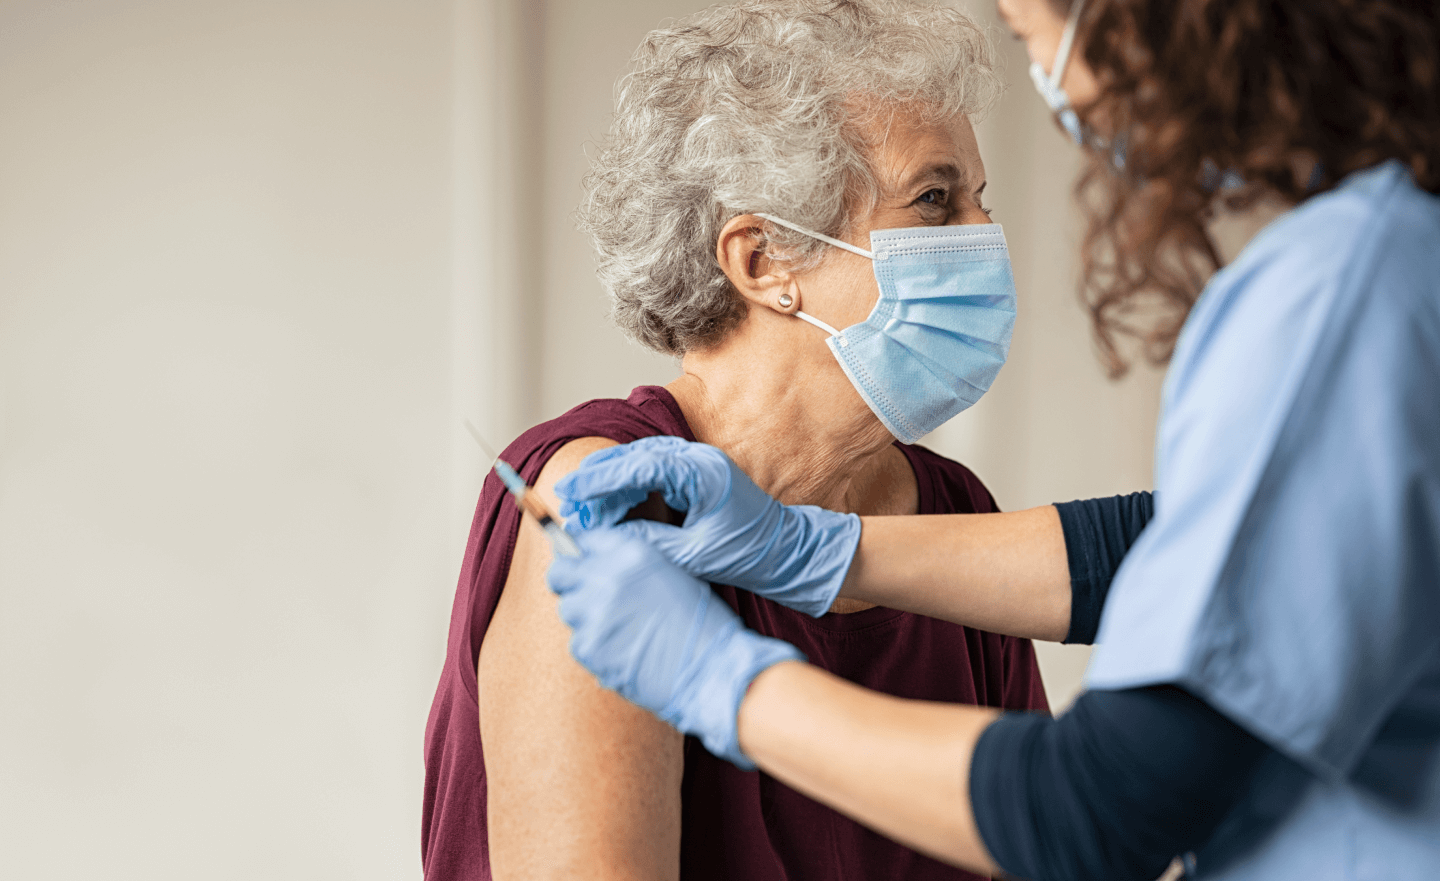 An old woman gets an injection